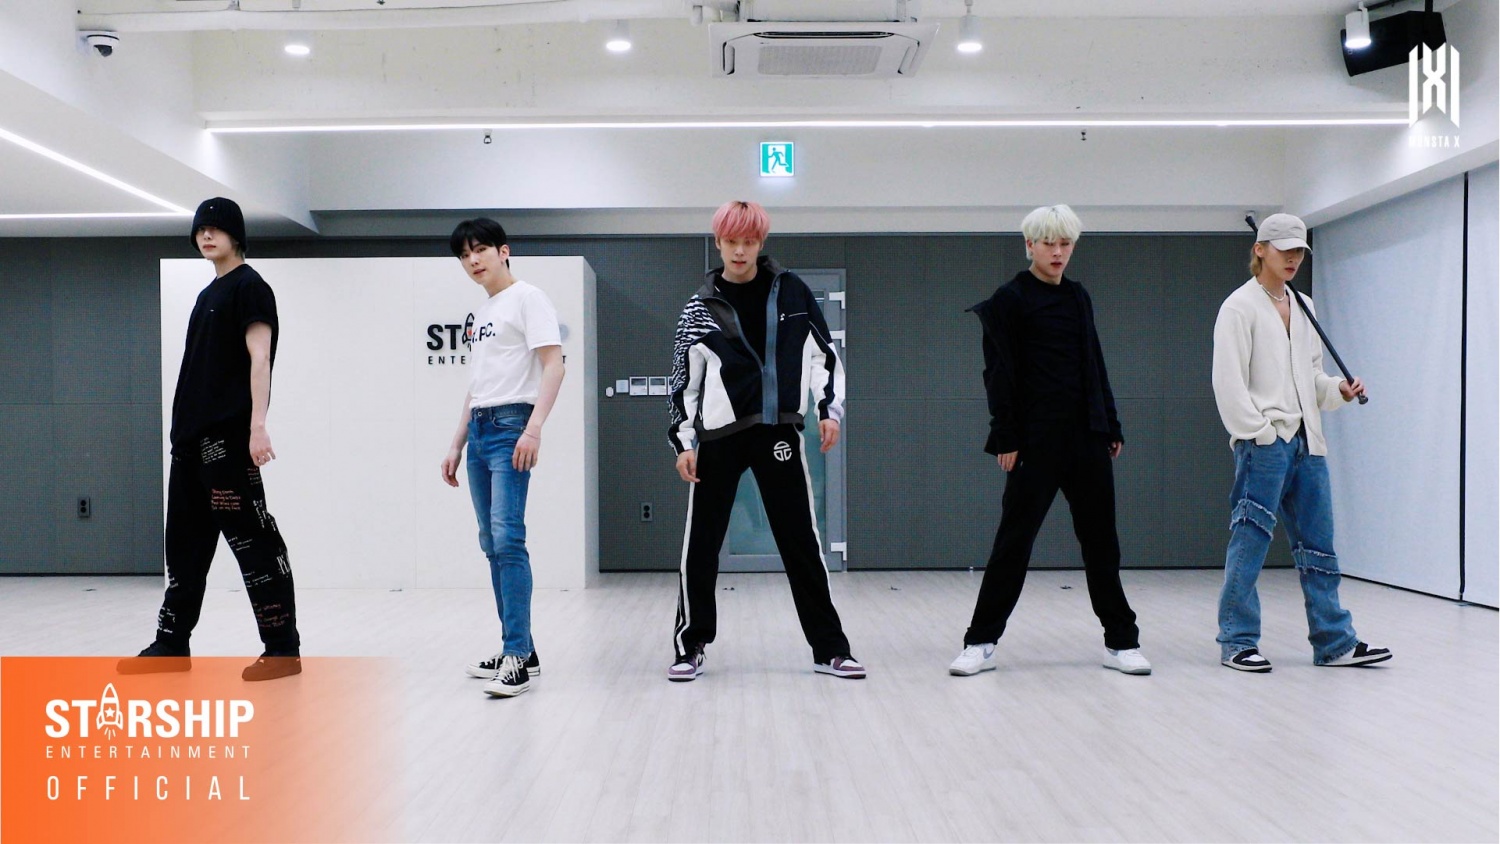 MONSTA X unveils moving version of new song 'LOVE' choreography video... sexy mood